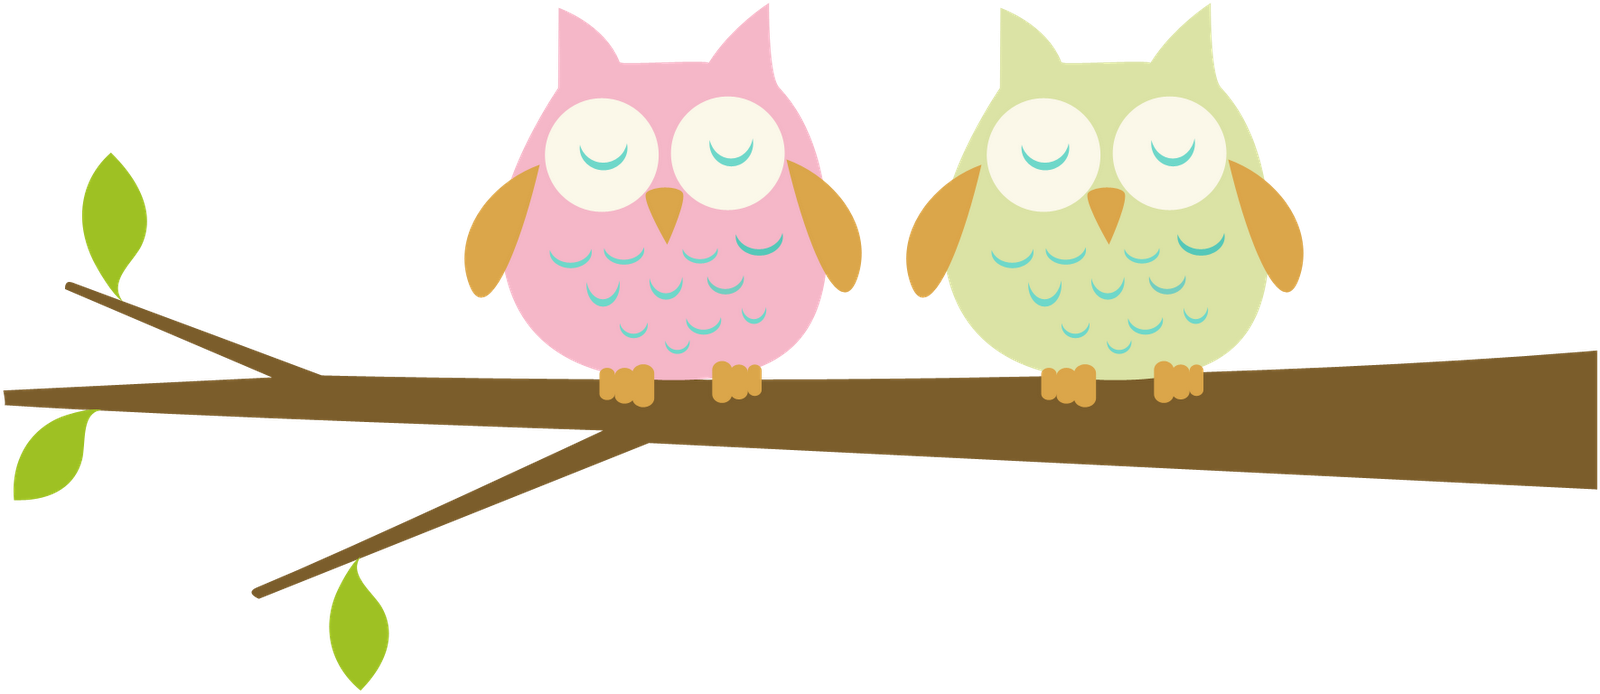 Owls clipart fall. Free baby cliparts download